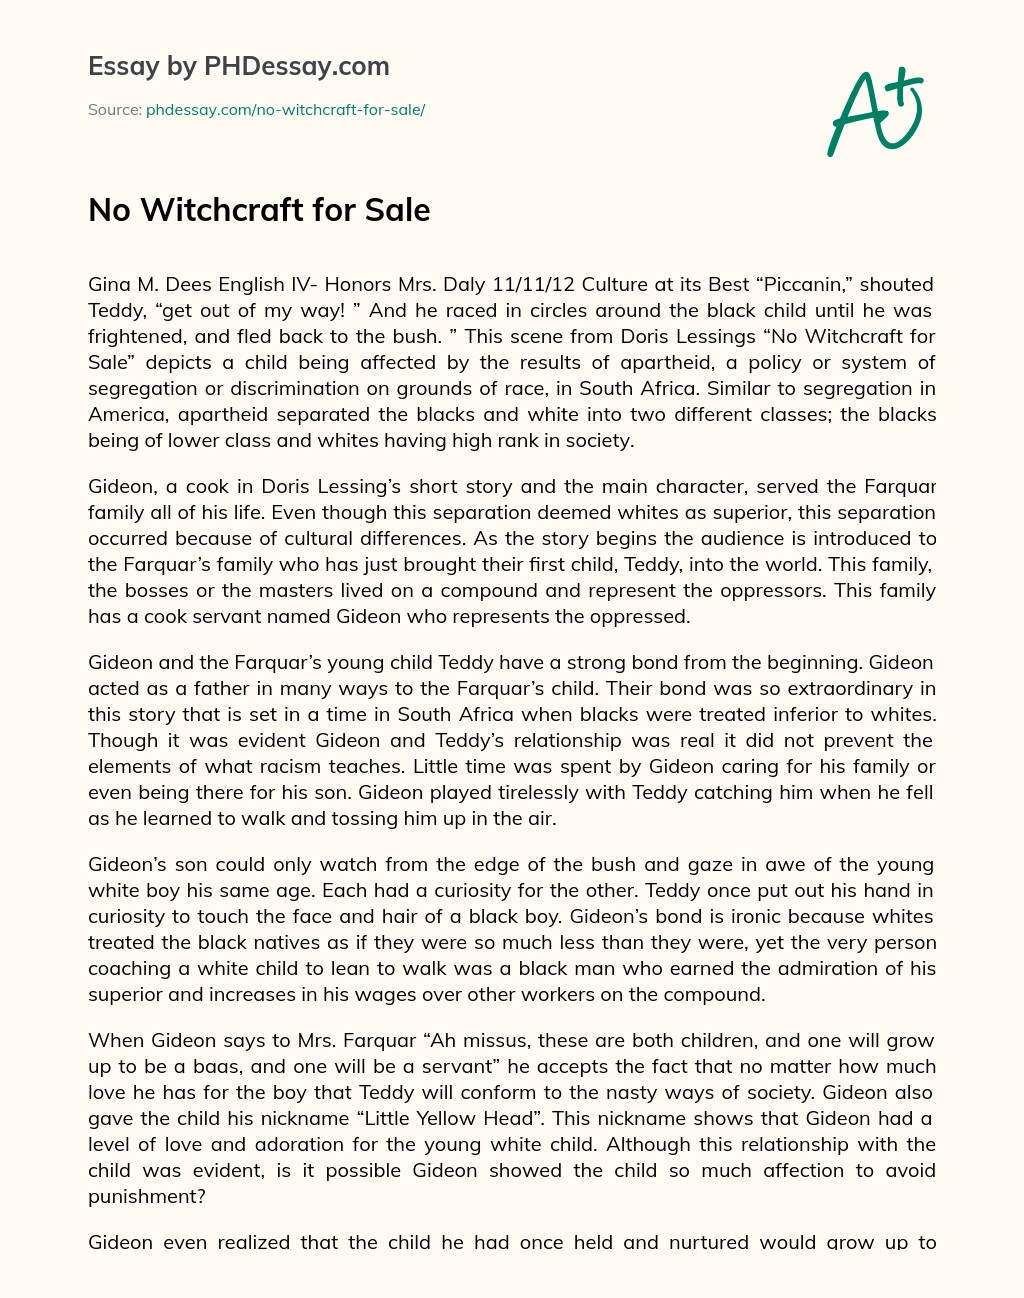 No witchcraft for Sale essay